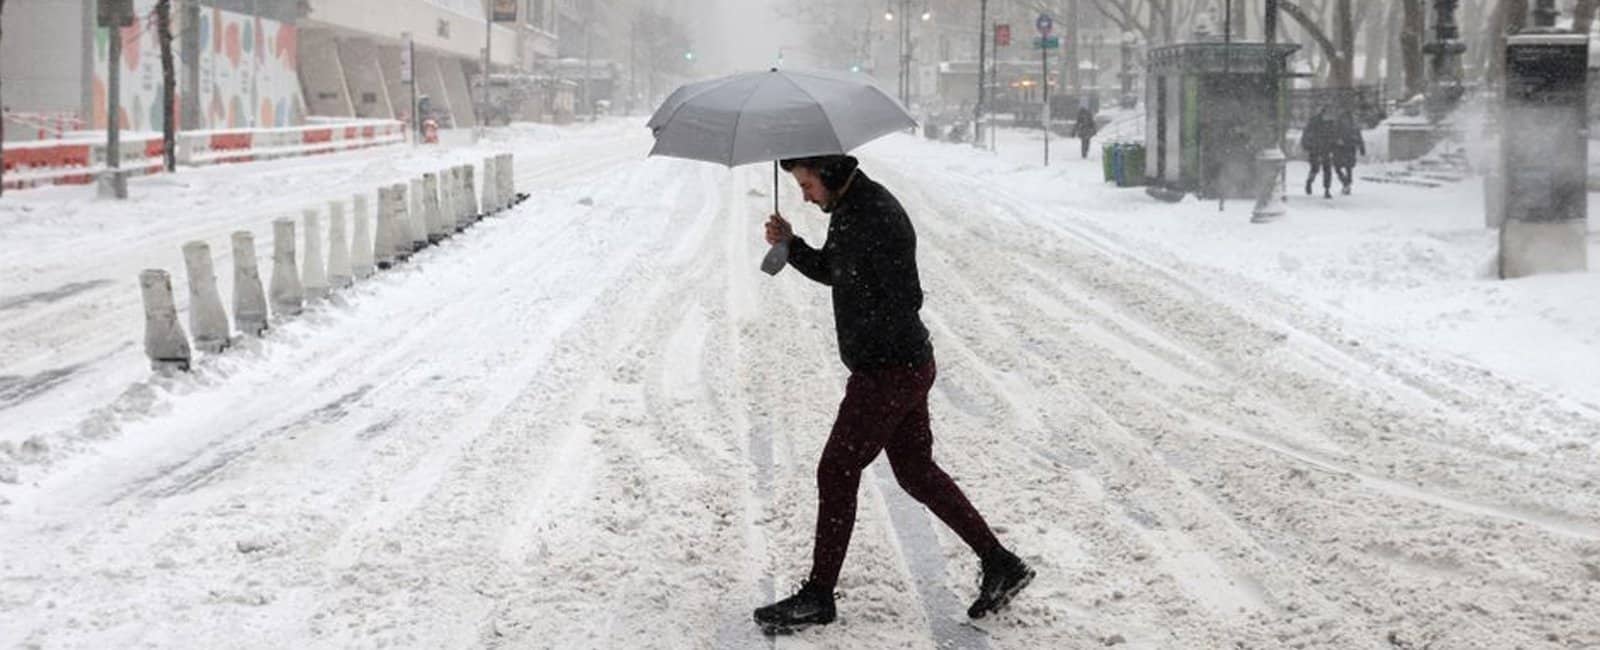 'One for the record books': US East Coast blanketed in snow